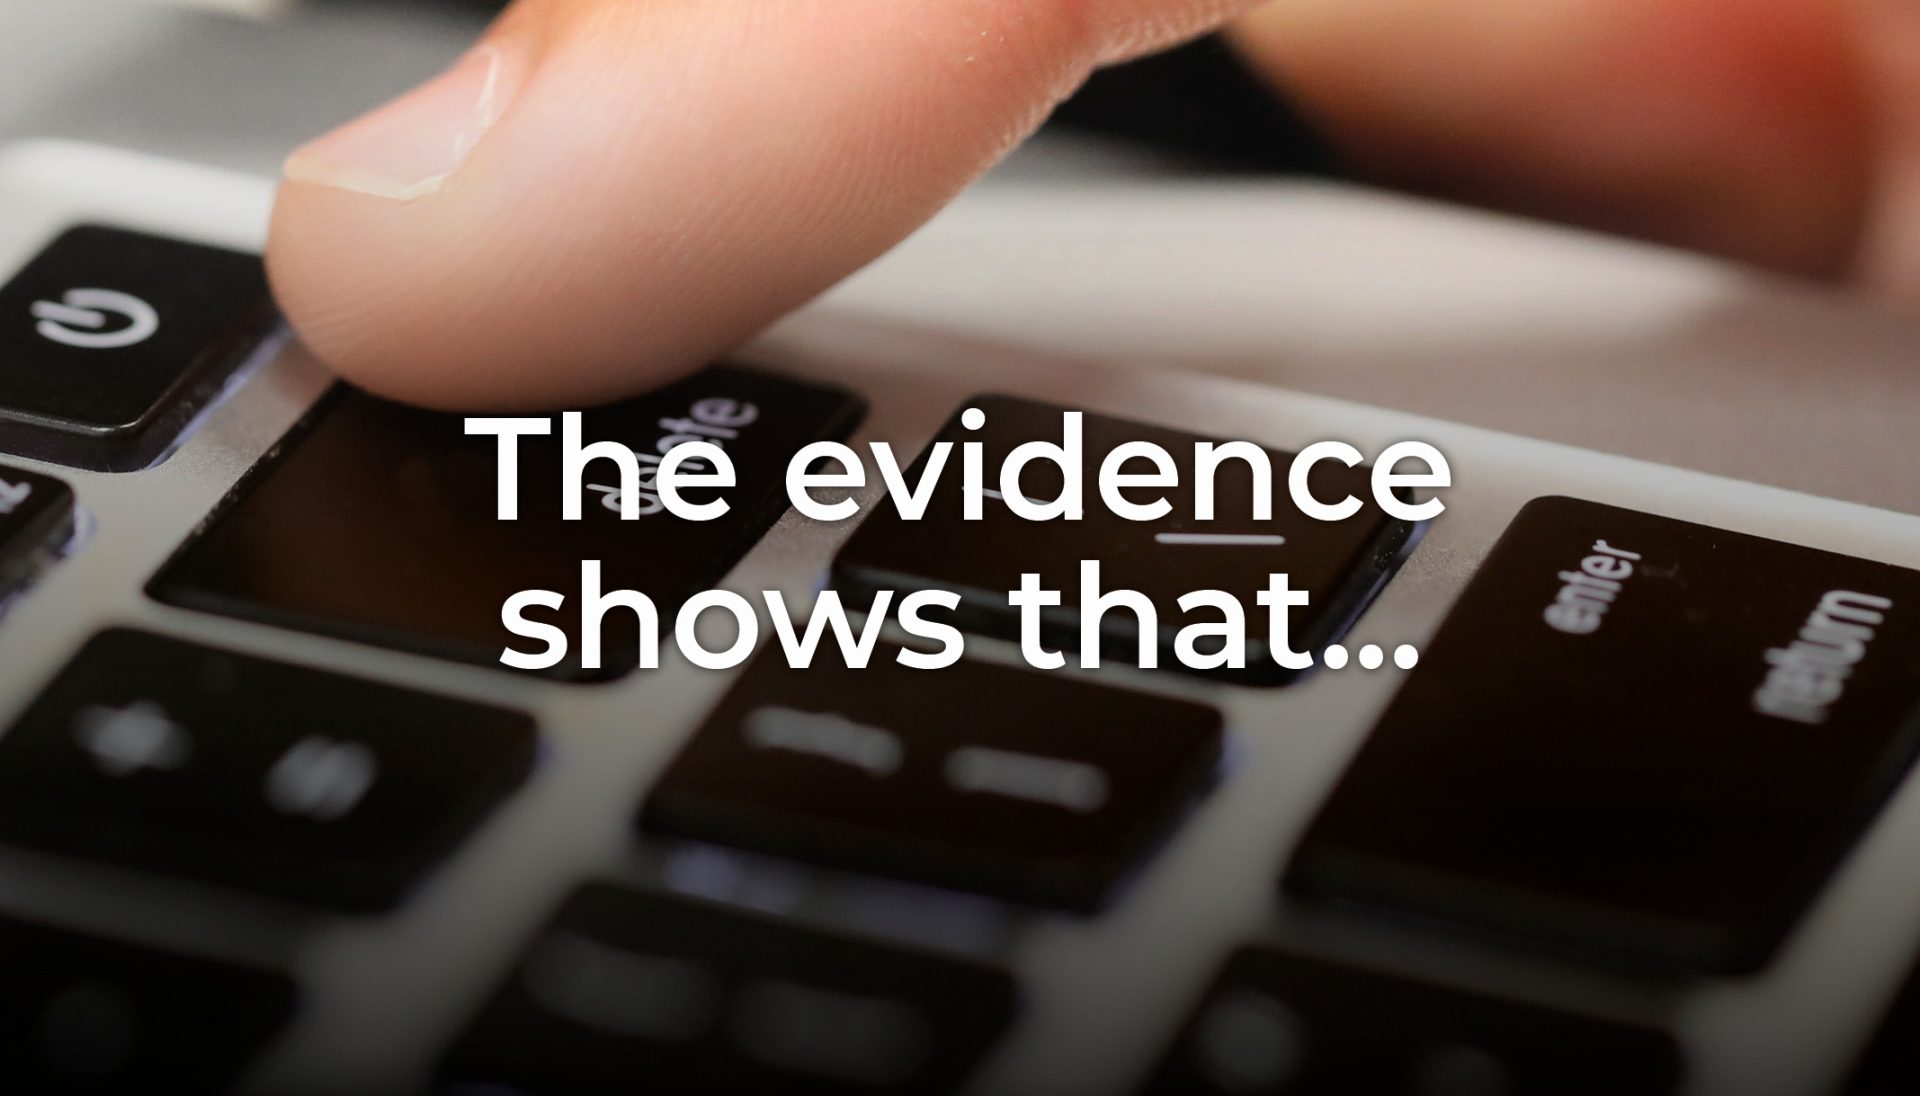 The evidence shows that…